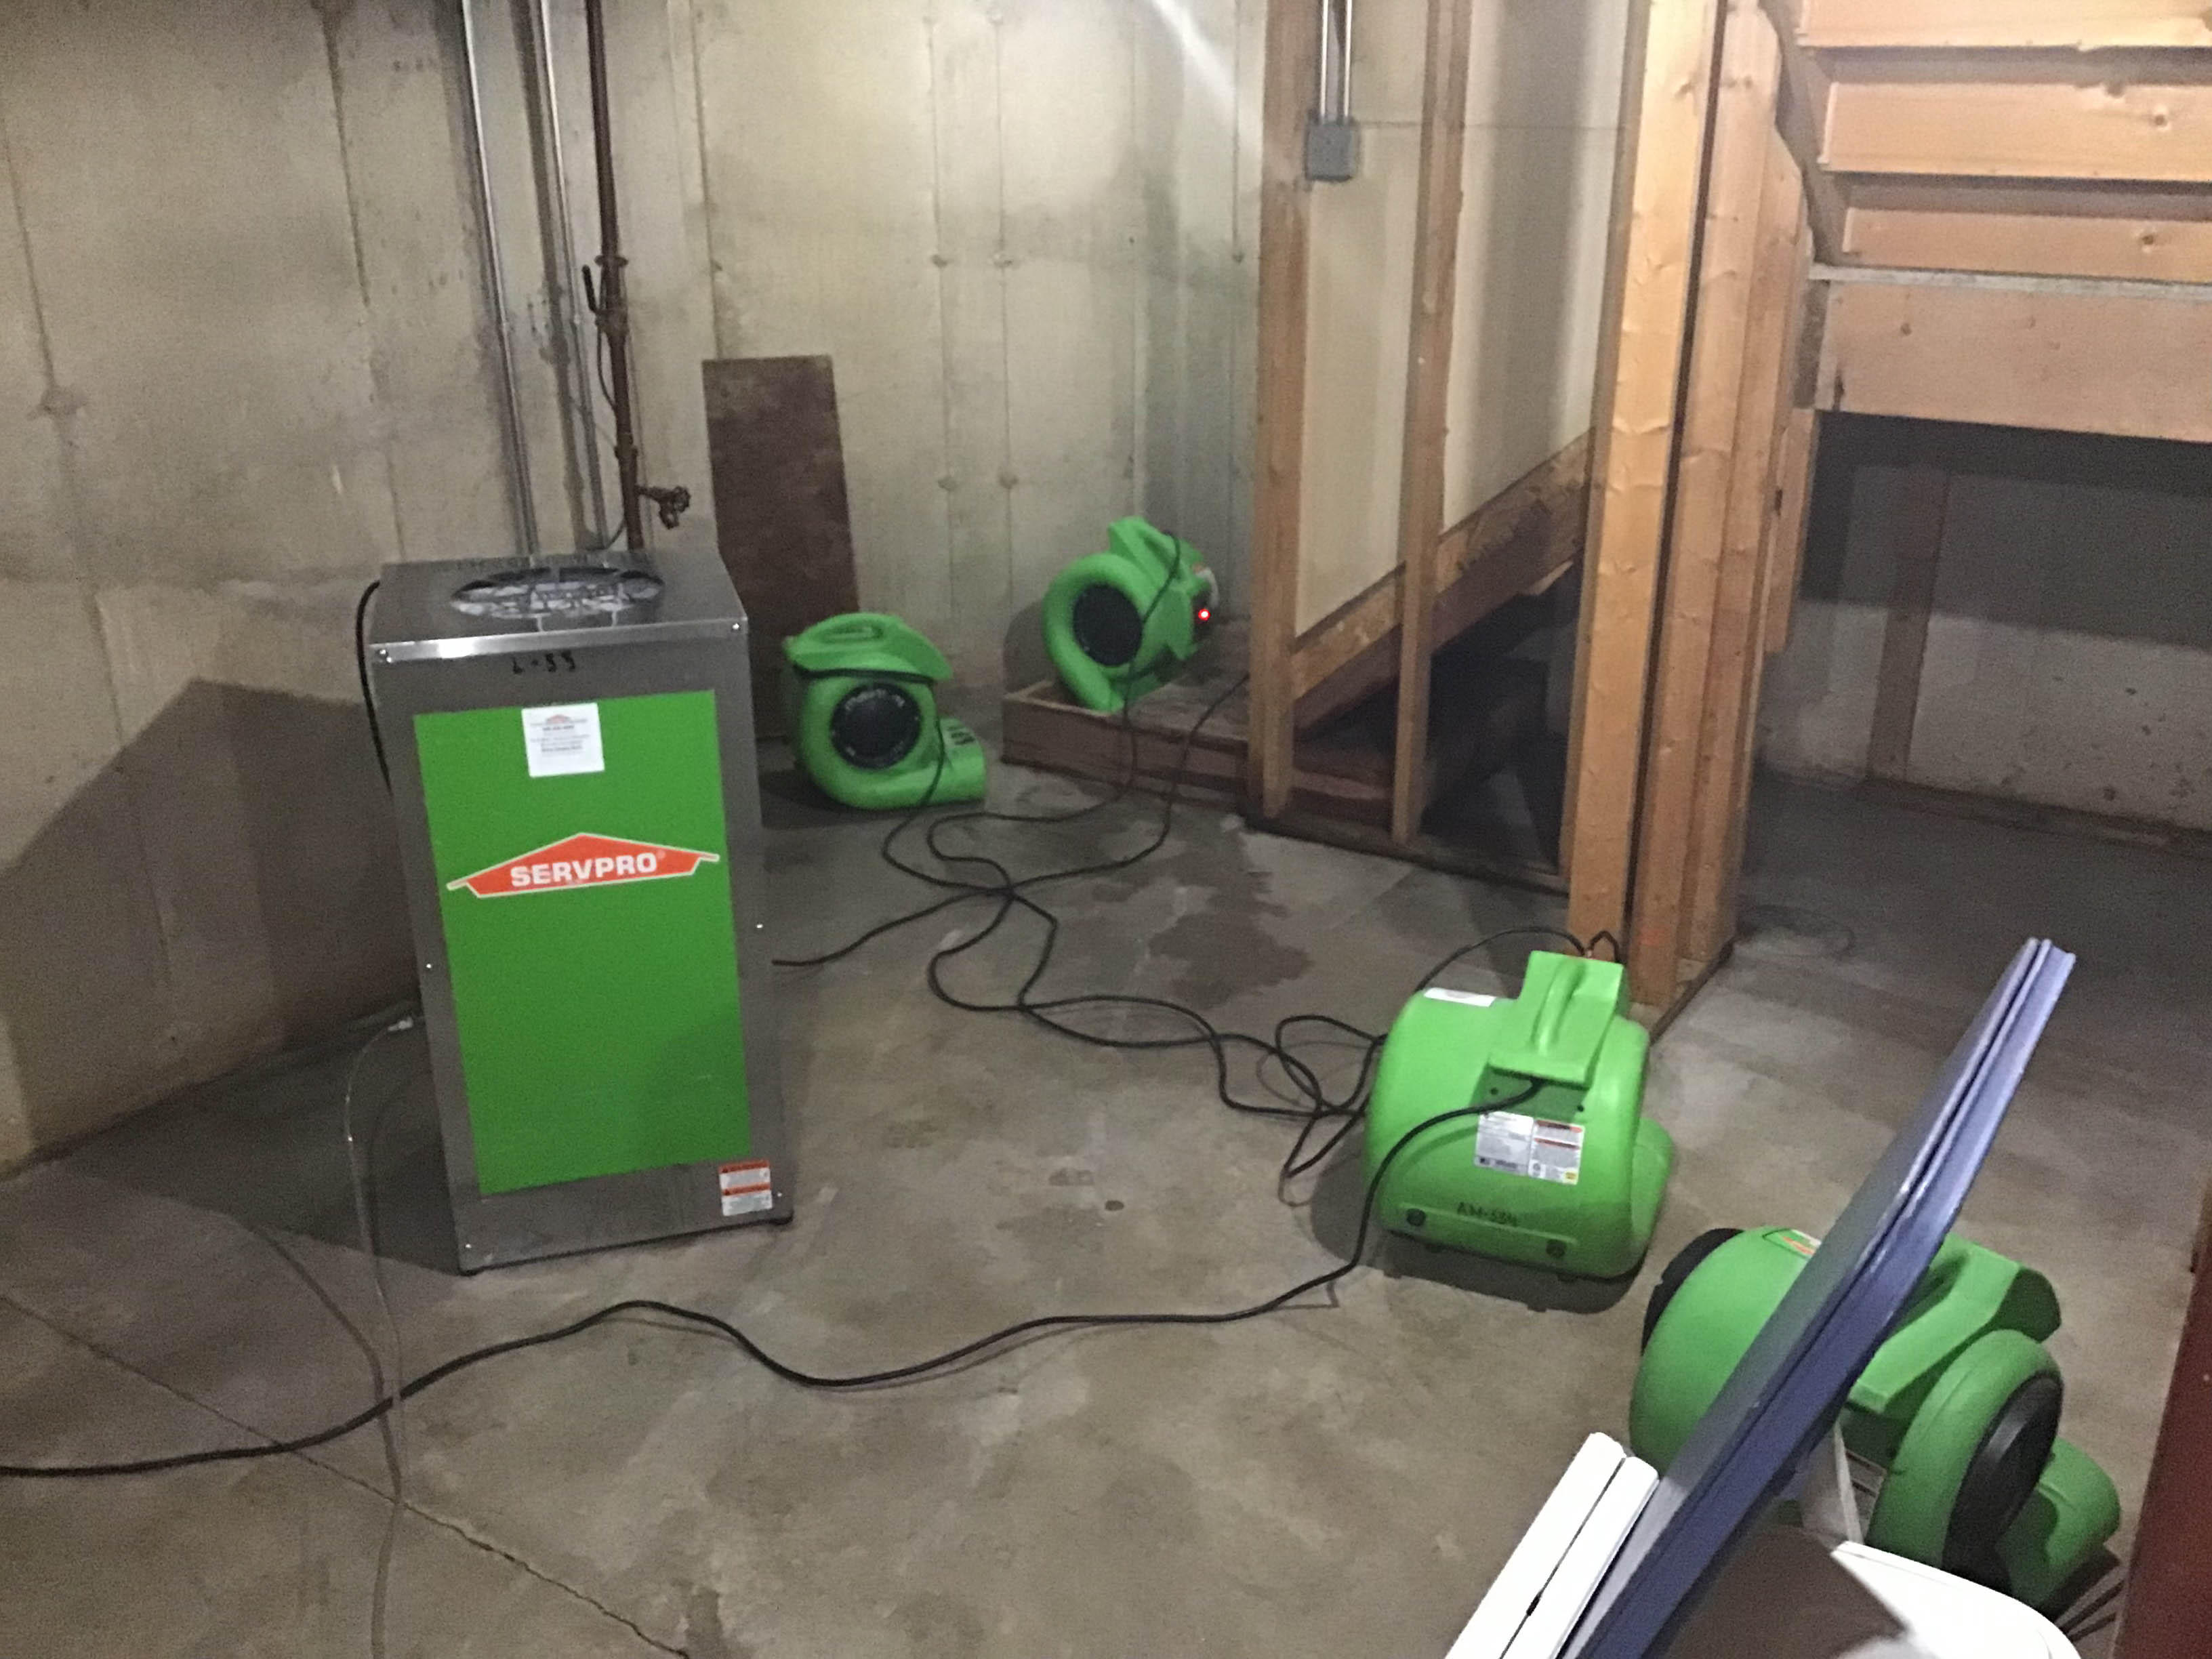 We have professional drying equipment used for any water restoration damage in your home or business